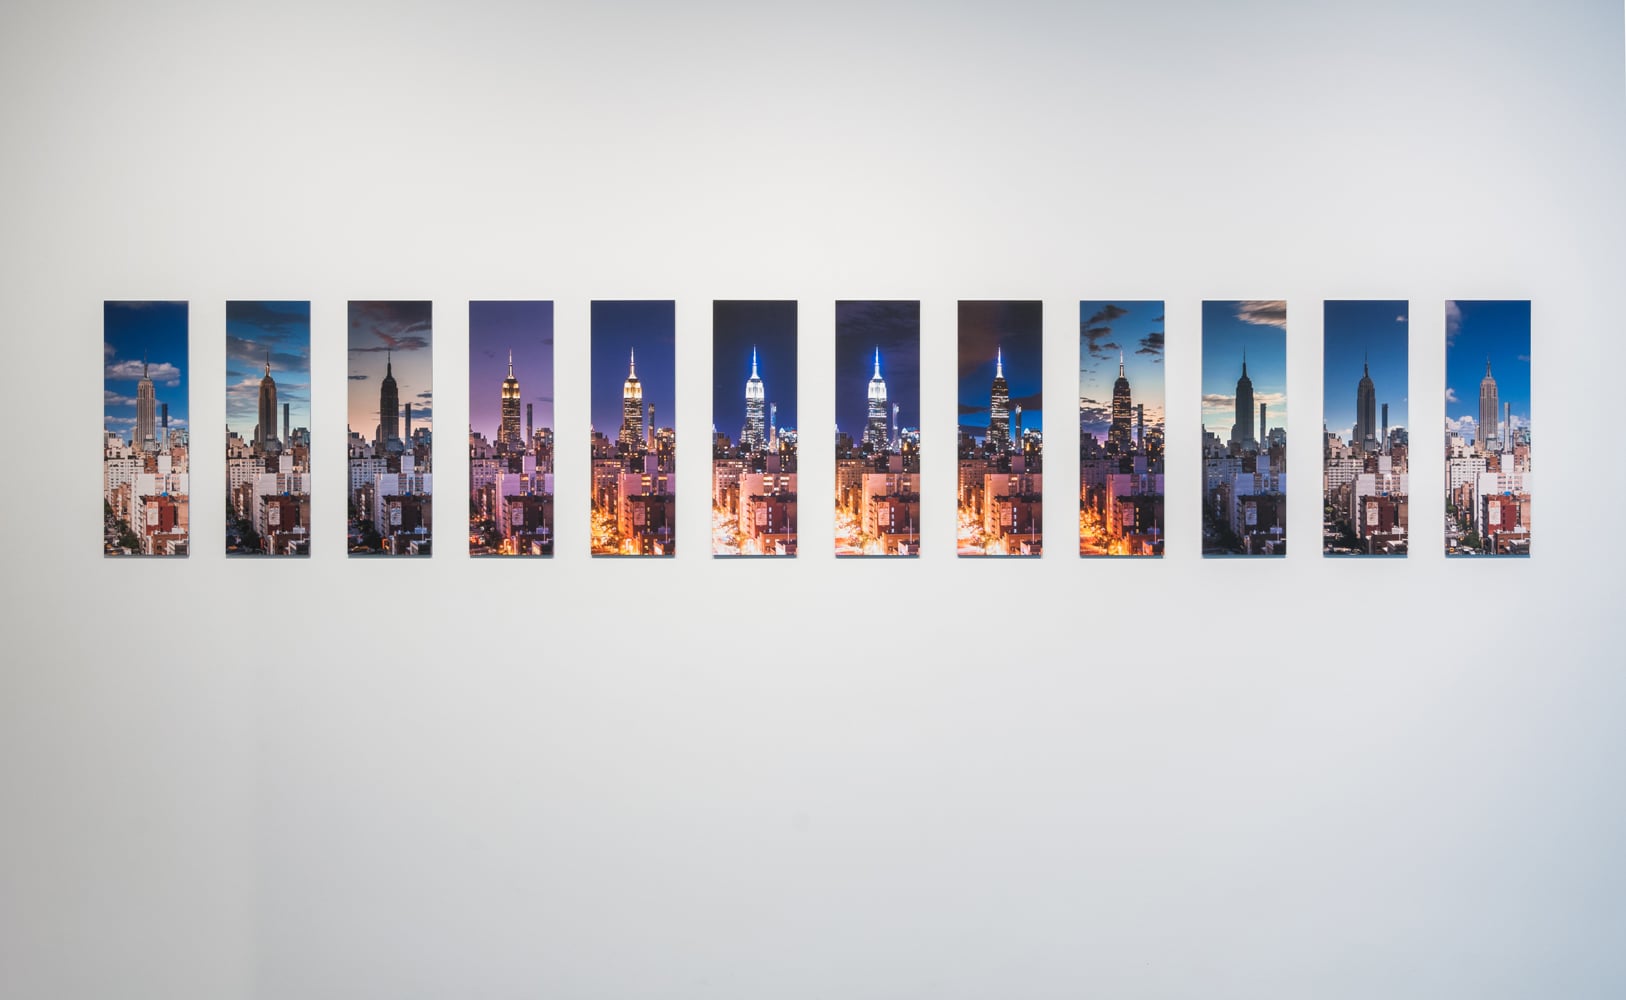   24 Hour Empire x 12 , 2016 12 unique digital prints mounted on board photography and technical assistance by Hal Bergman 